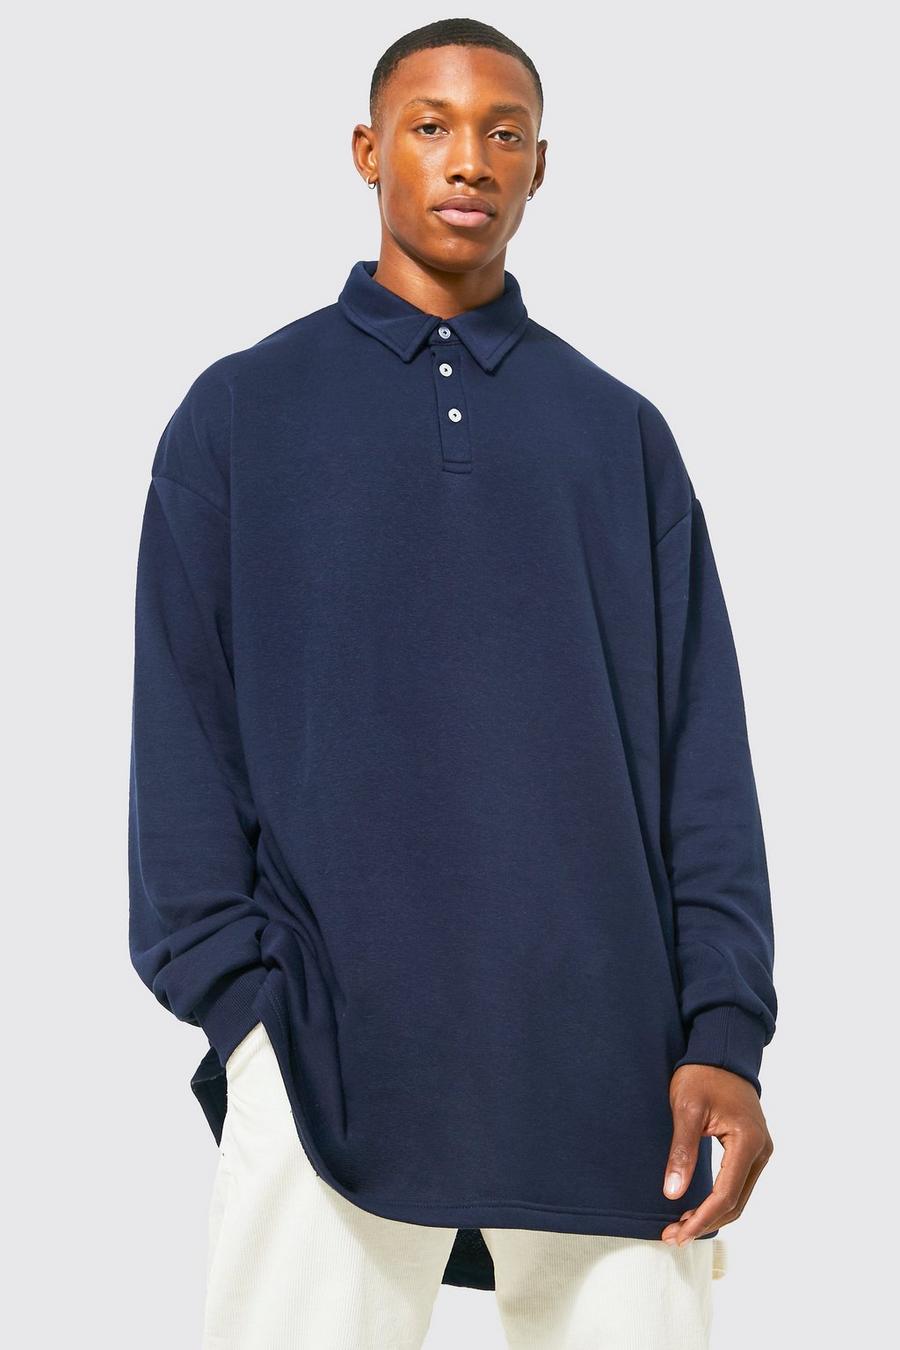 Navy blu oltremare Exteme Oversized Loopback Rugby Top